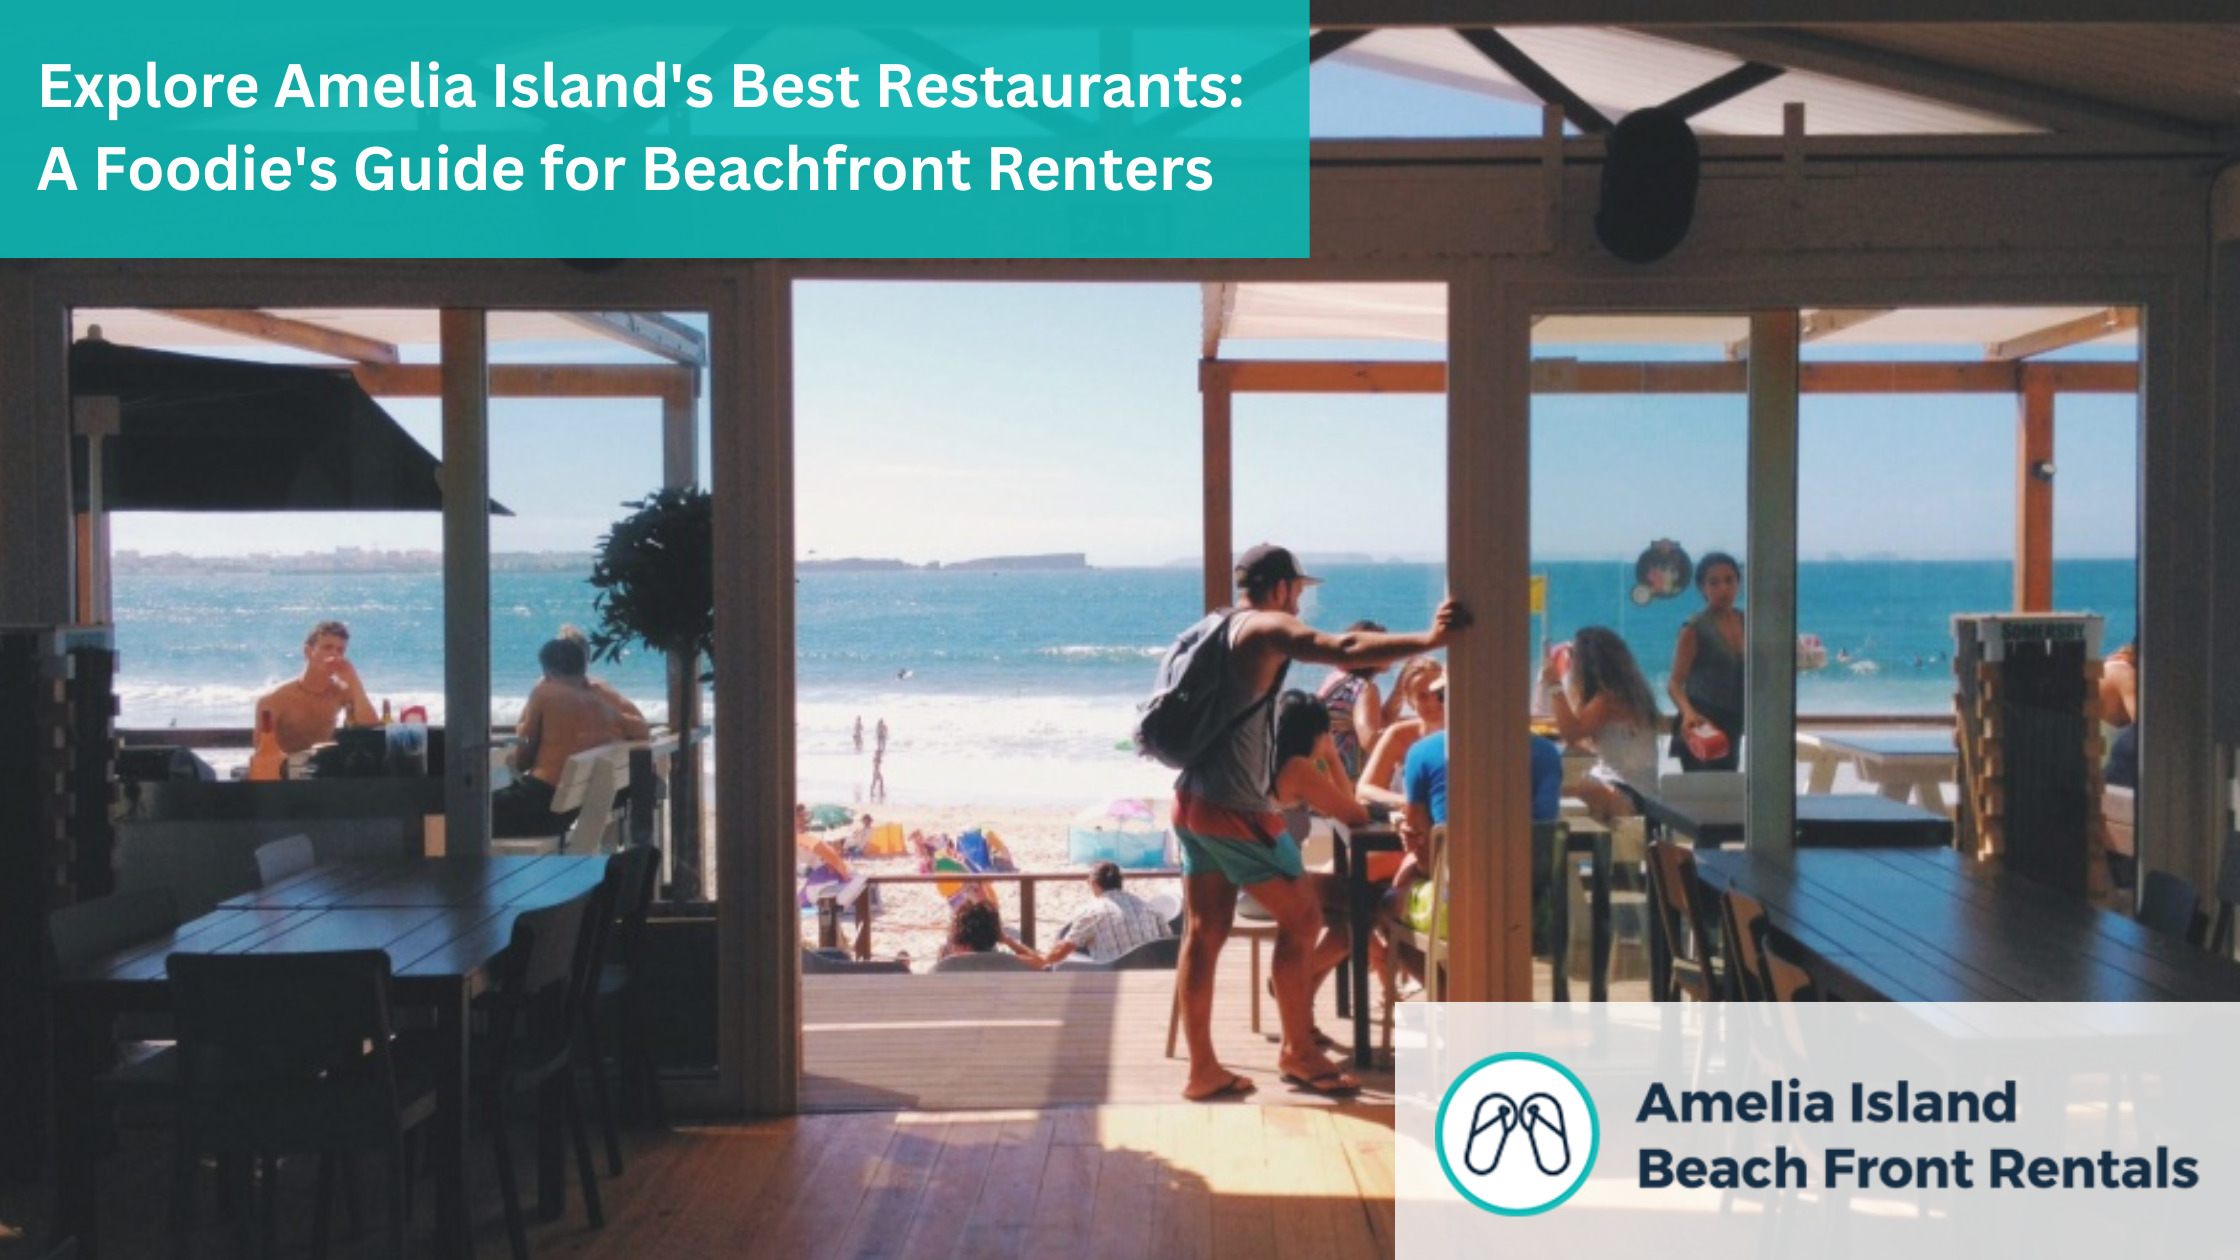 Amelia Island's Best Restaurants: A Foodie's Guide for Beachfront Renters